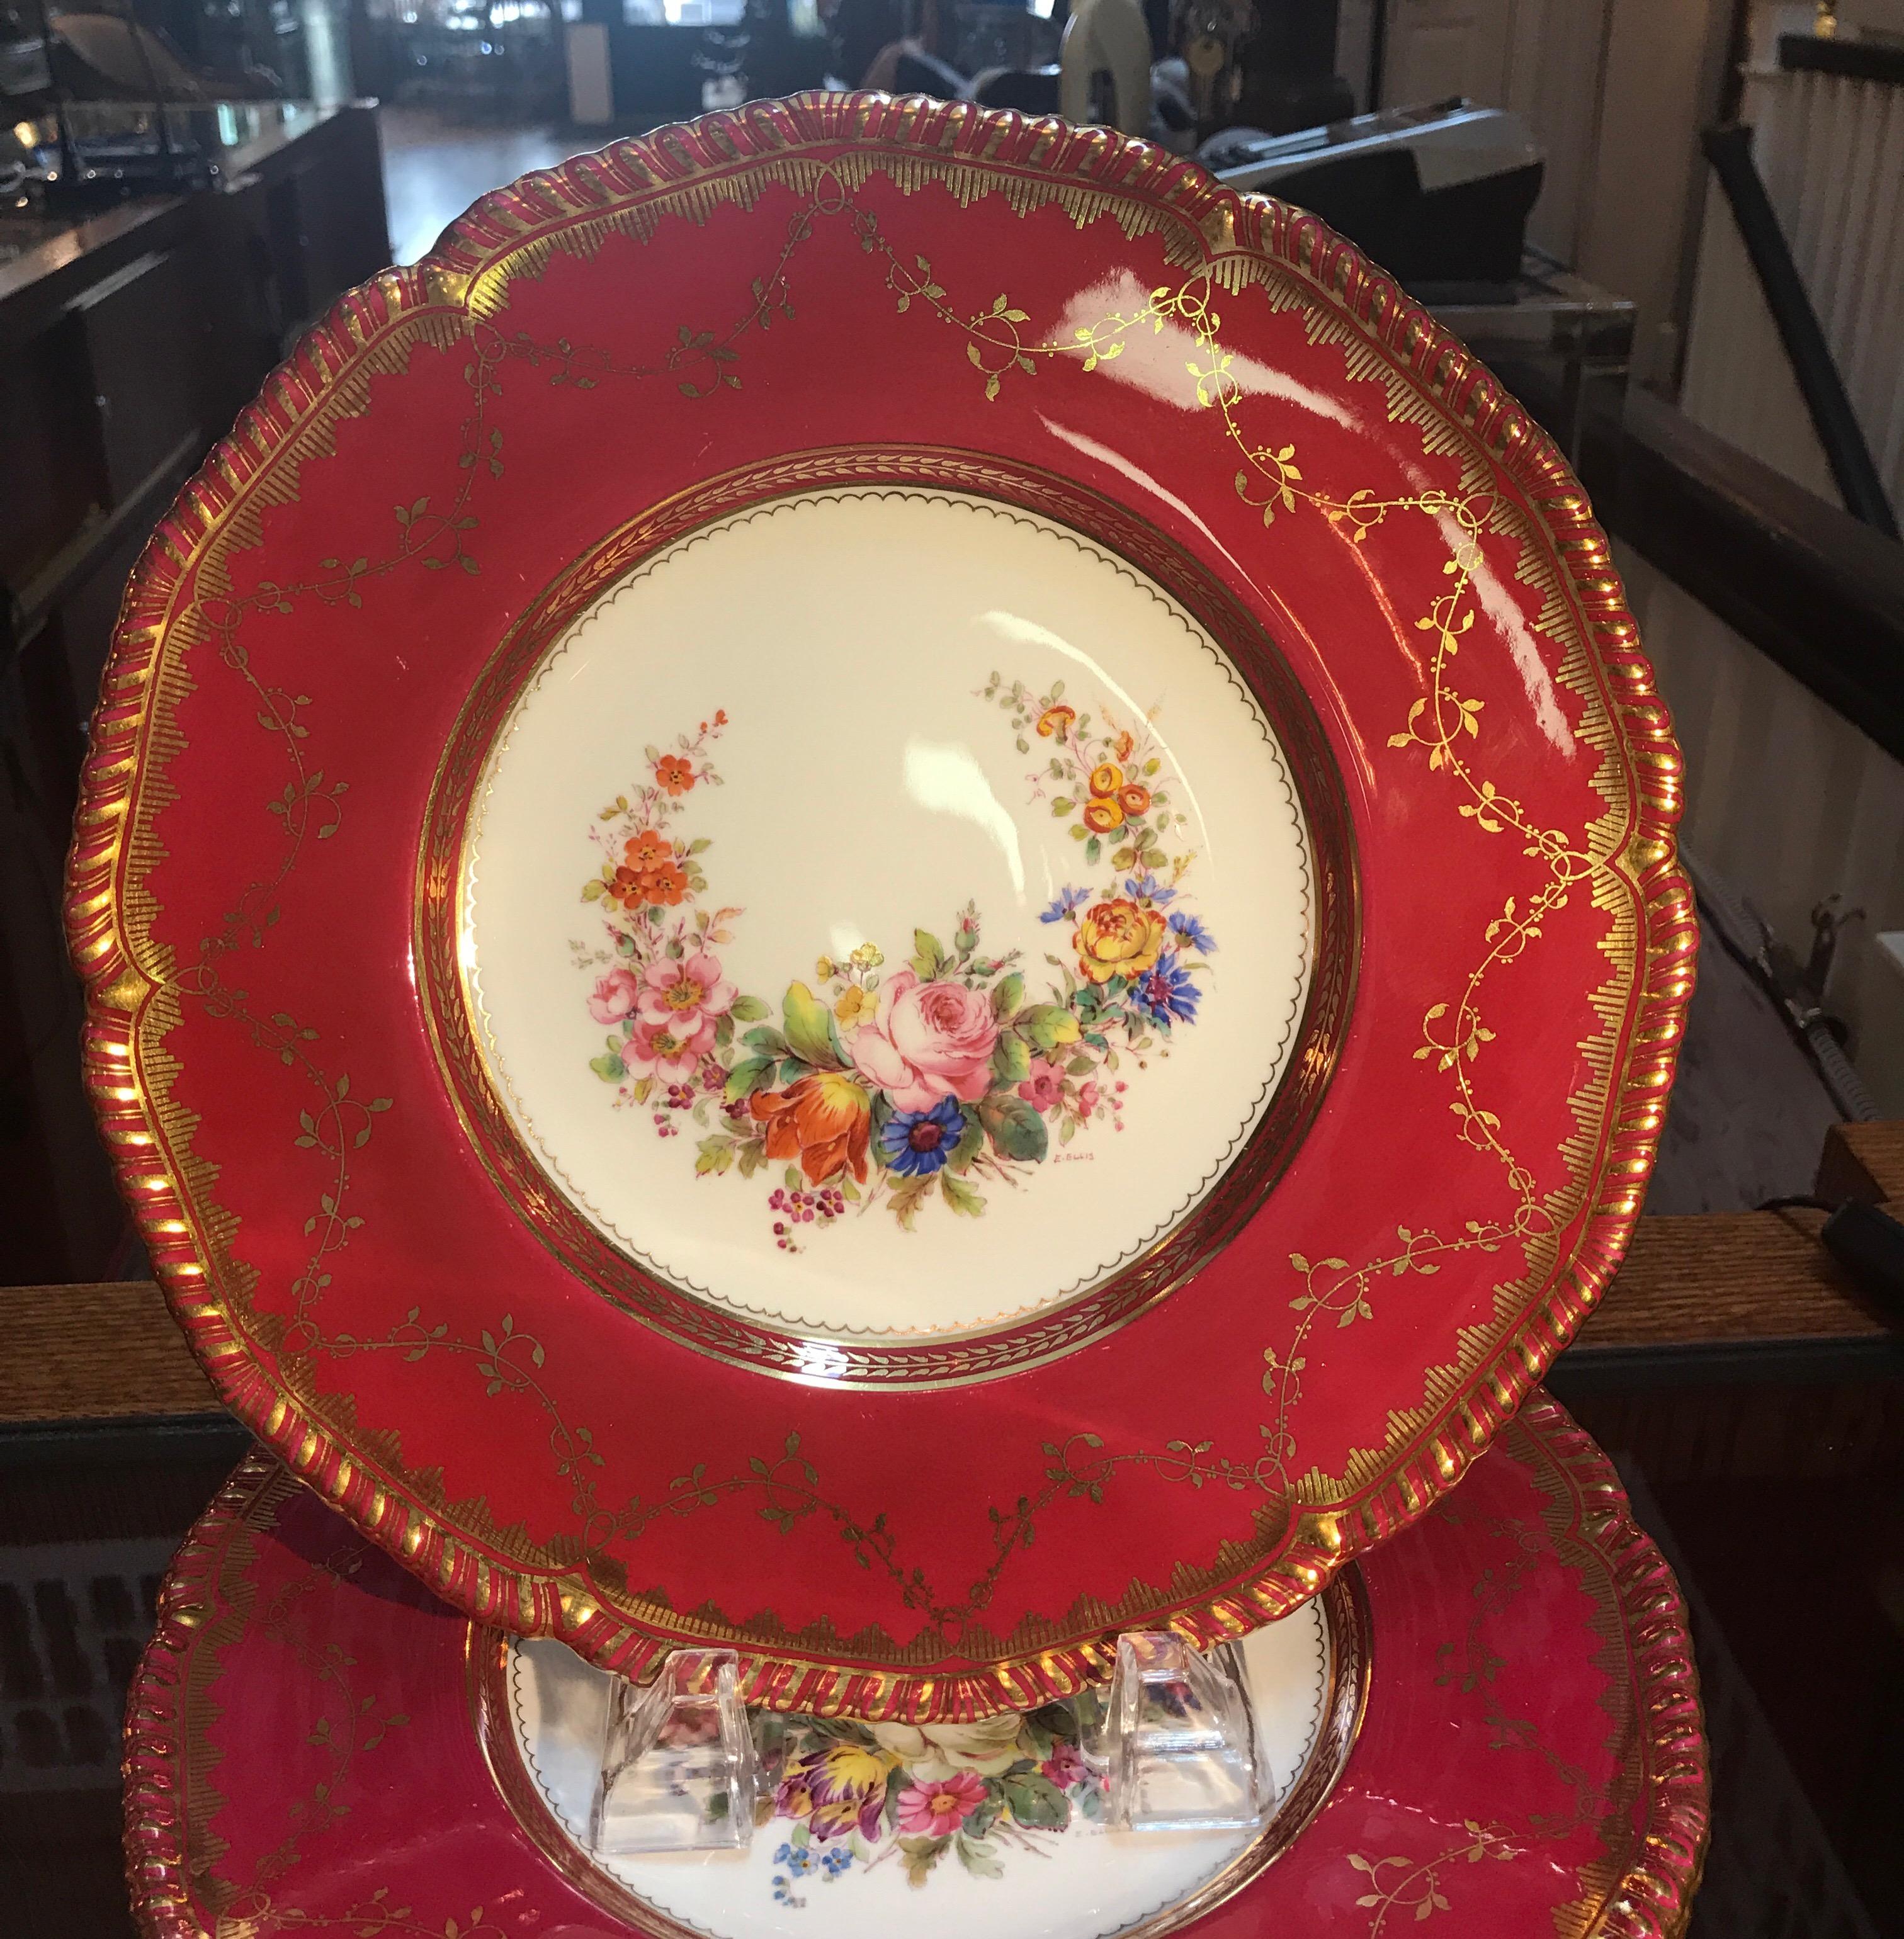 A set of ten hand-painted and gilt service dinner plates by Minton, England. The hand-painted porcelain plates with floral garlands and berry red borders with gilt overlay. Each one signed by the artist E. Ellis. Each one with the Minton mark and